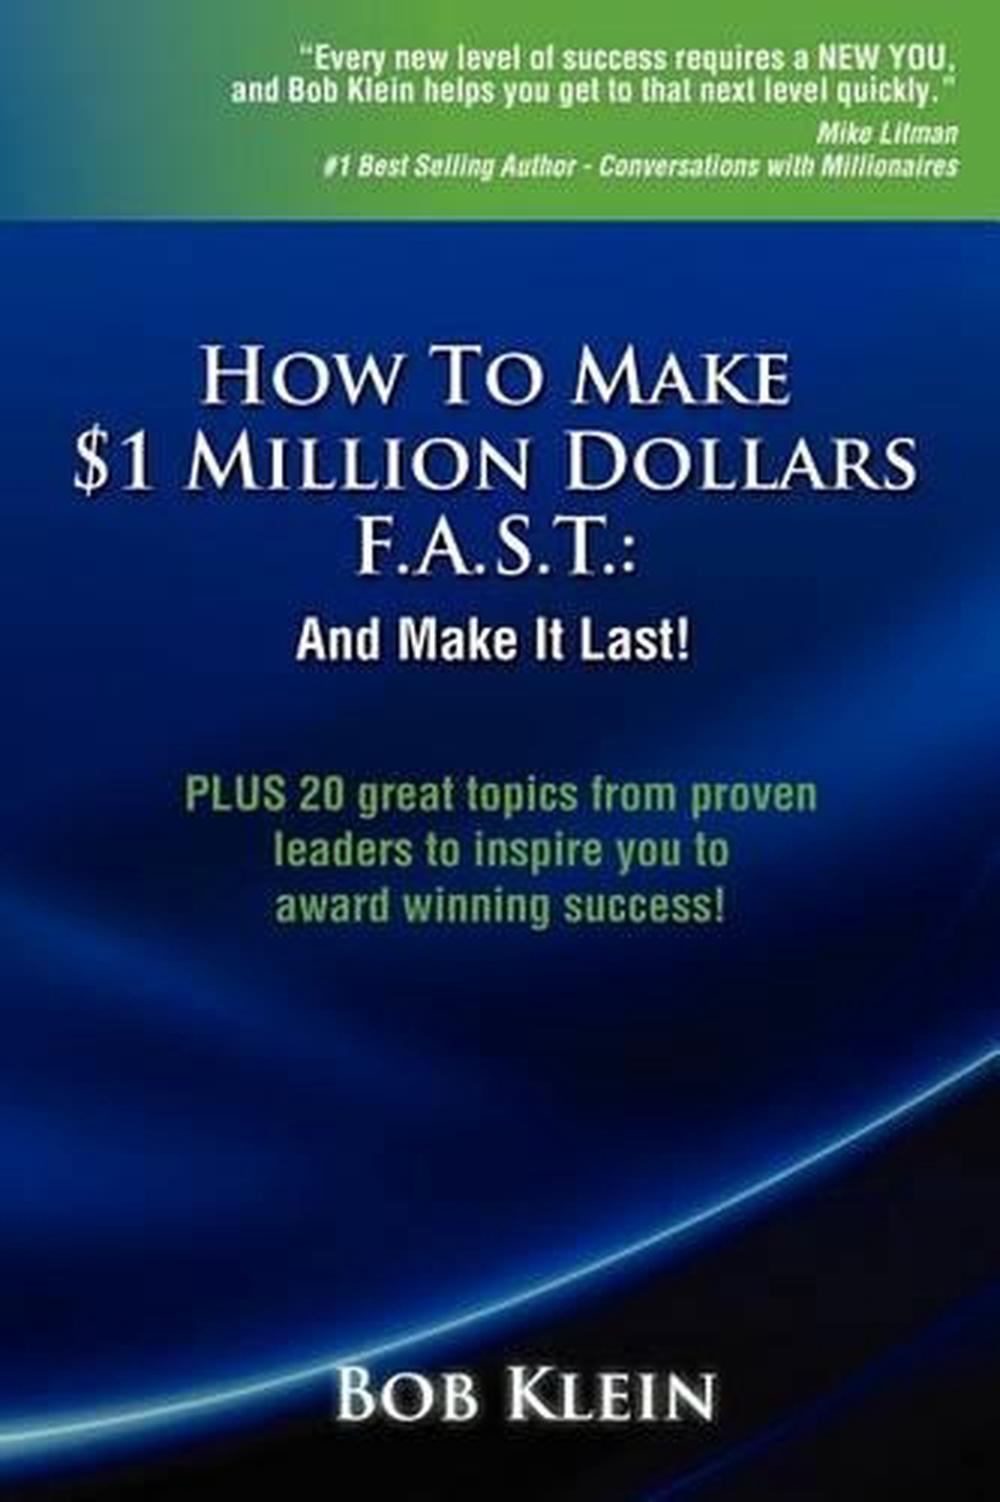 How to Make $1 Million Dollars F.A.S.T. and Make It Last! by Bob Klein (English) - Picture 1 of 1